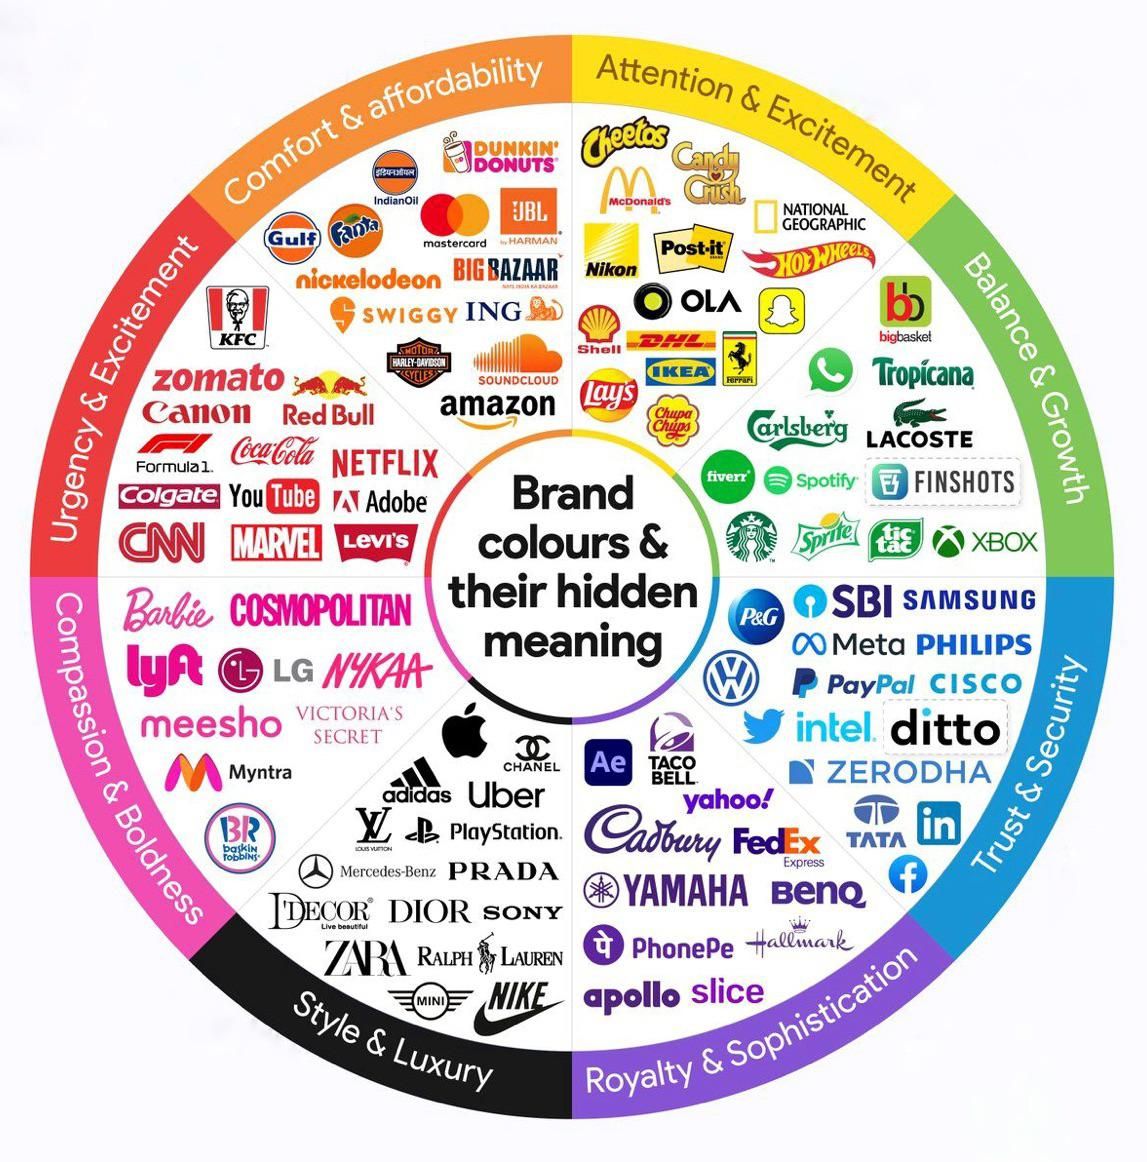 Brand colors and their hidden meanings. #Marketing #Design